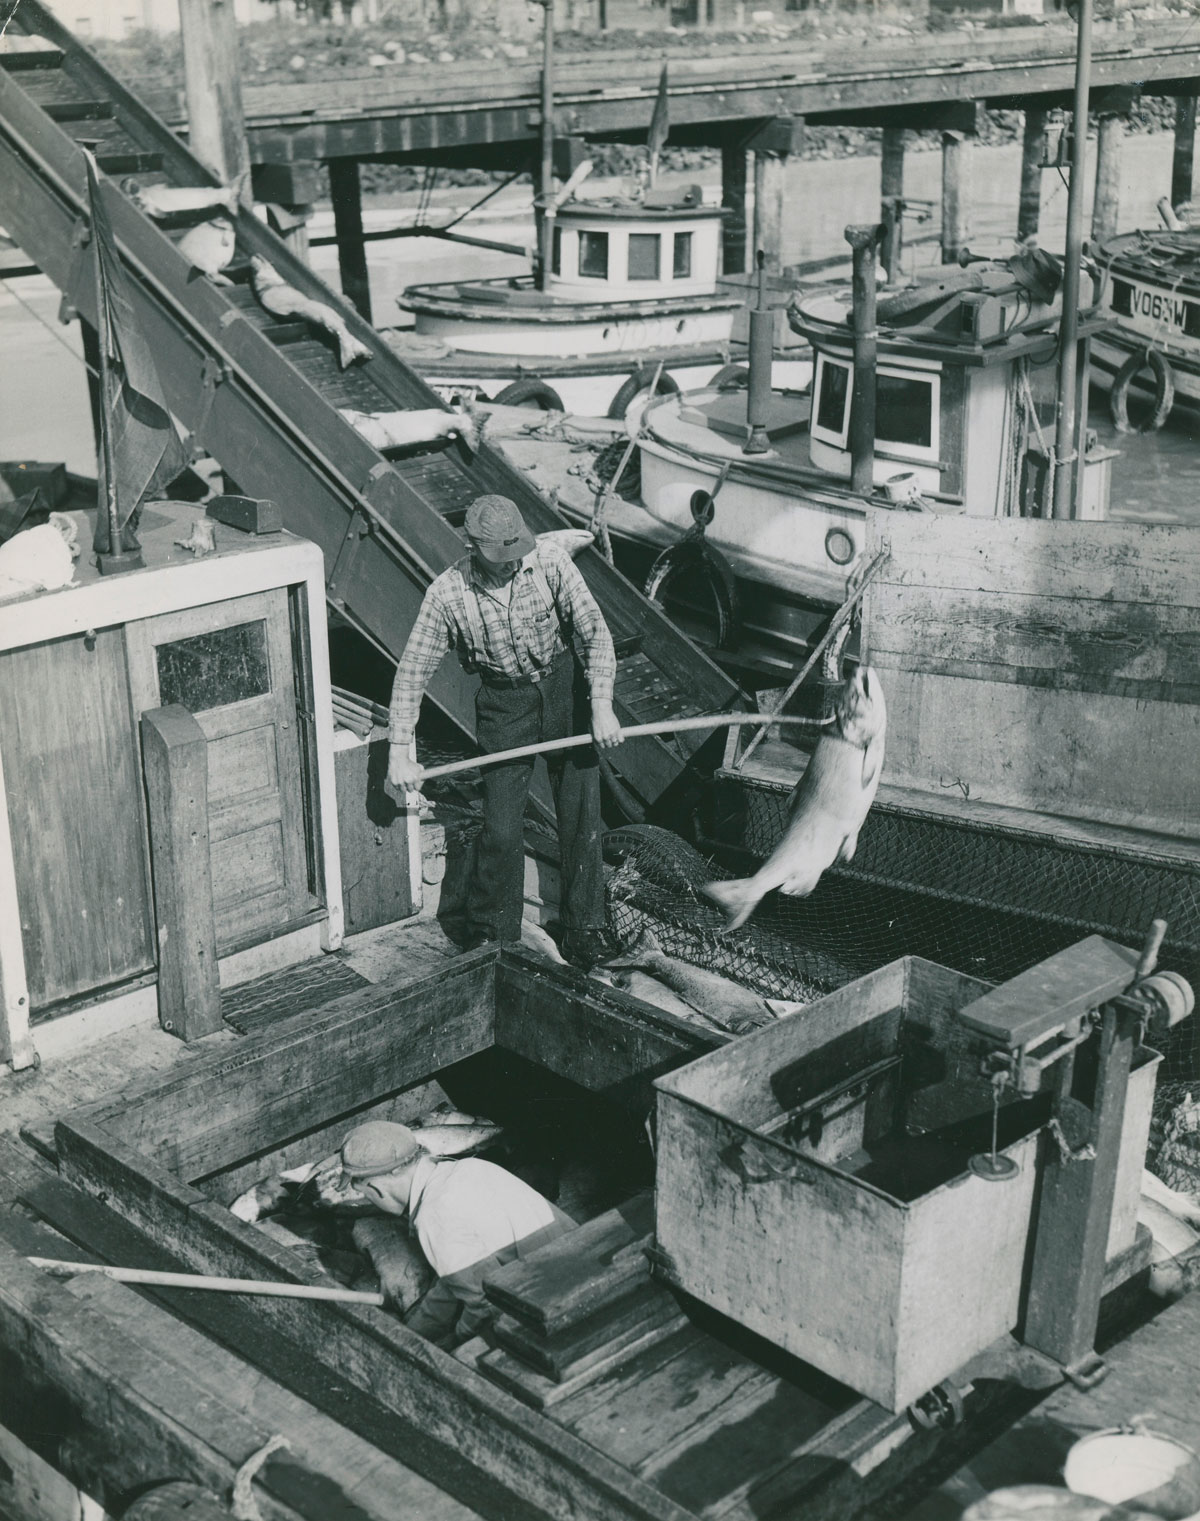 Two men, one in the hatch and one on the deck of a boat, unload salmon onto a fish elevator using peughs or pikes. Many fishing boats are docked in the background.